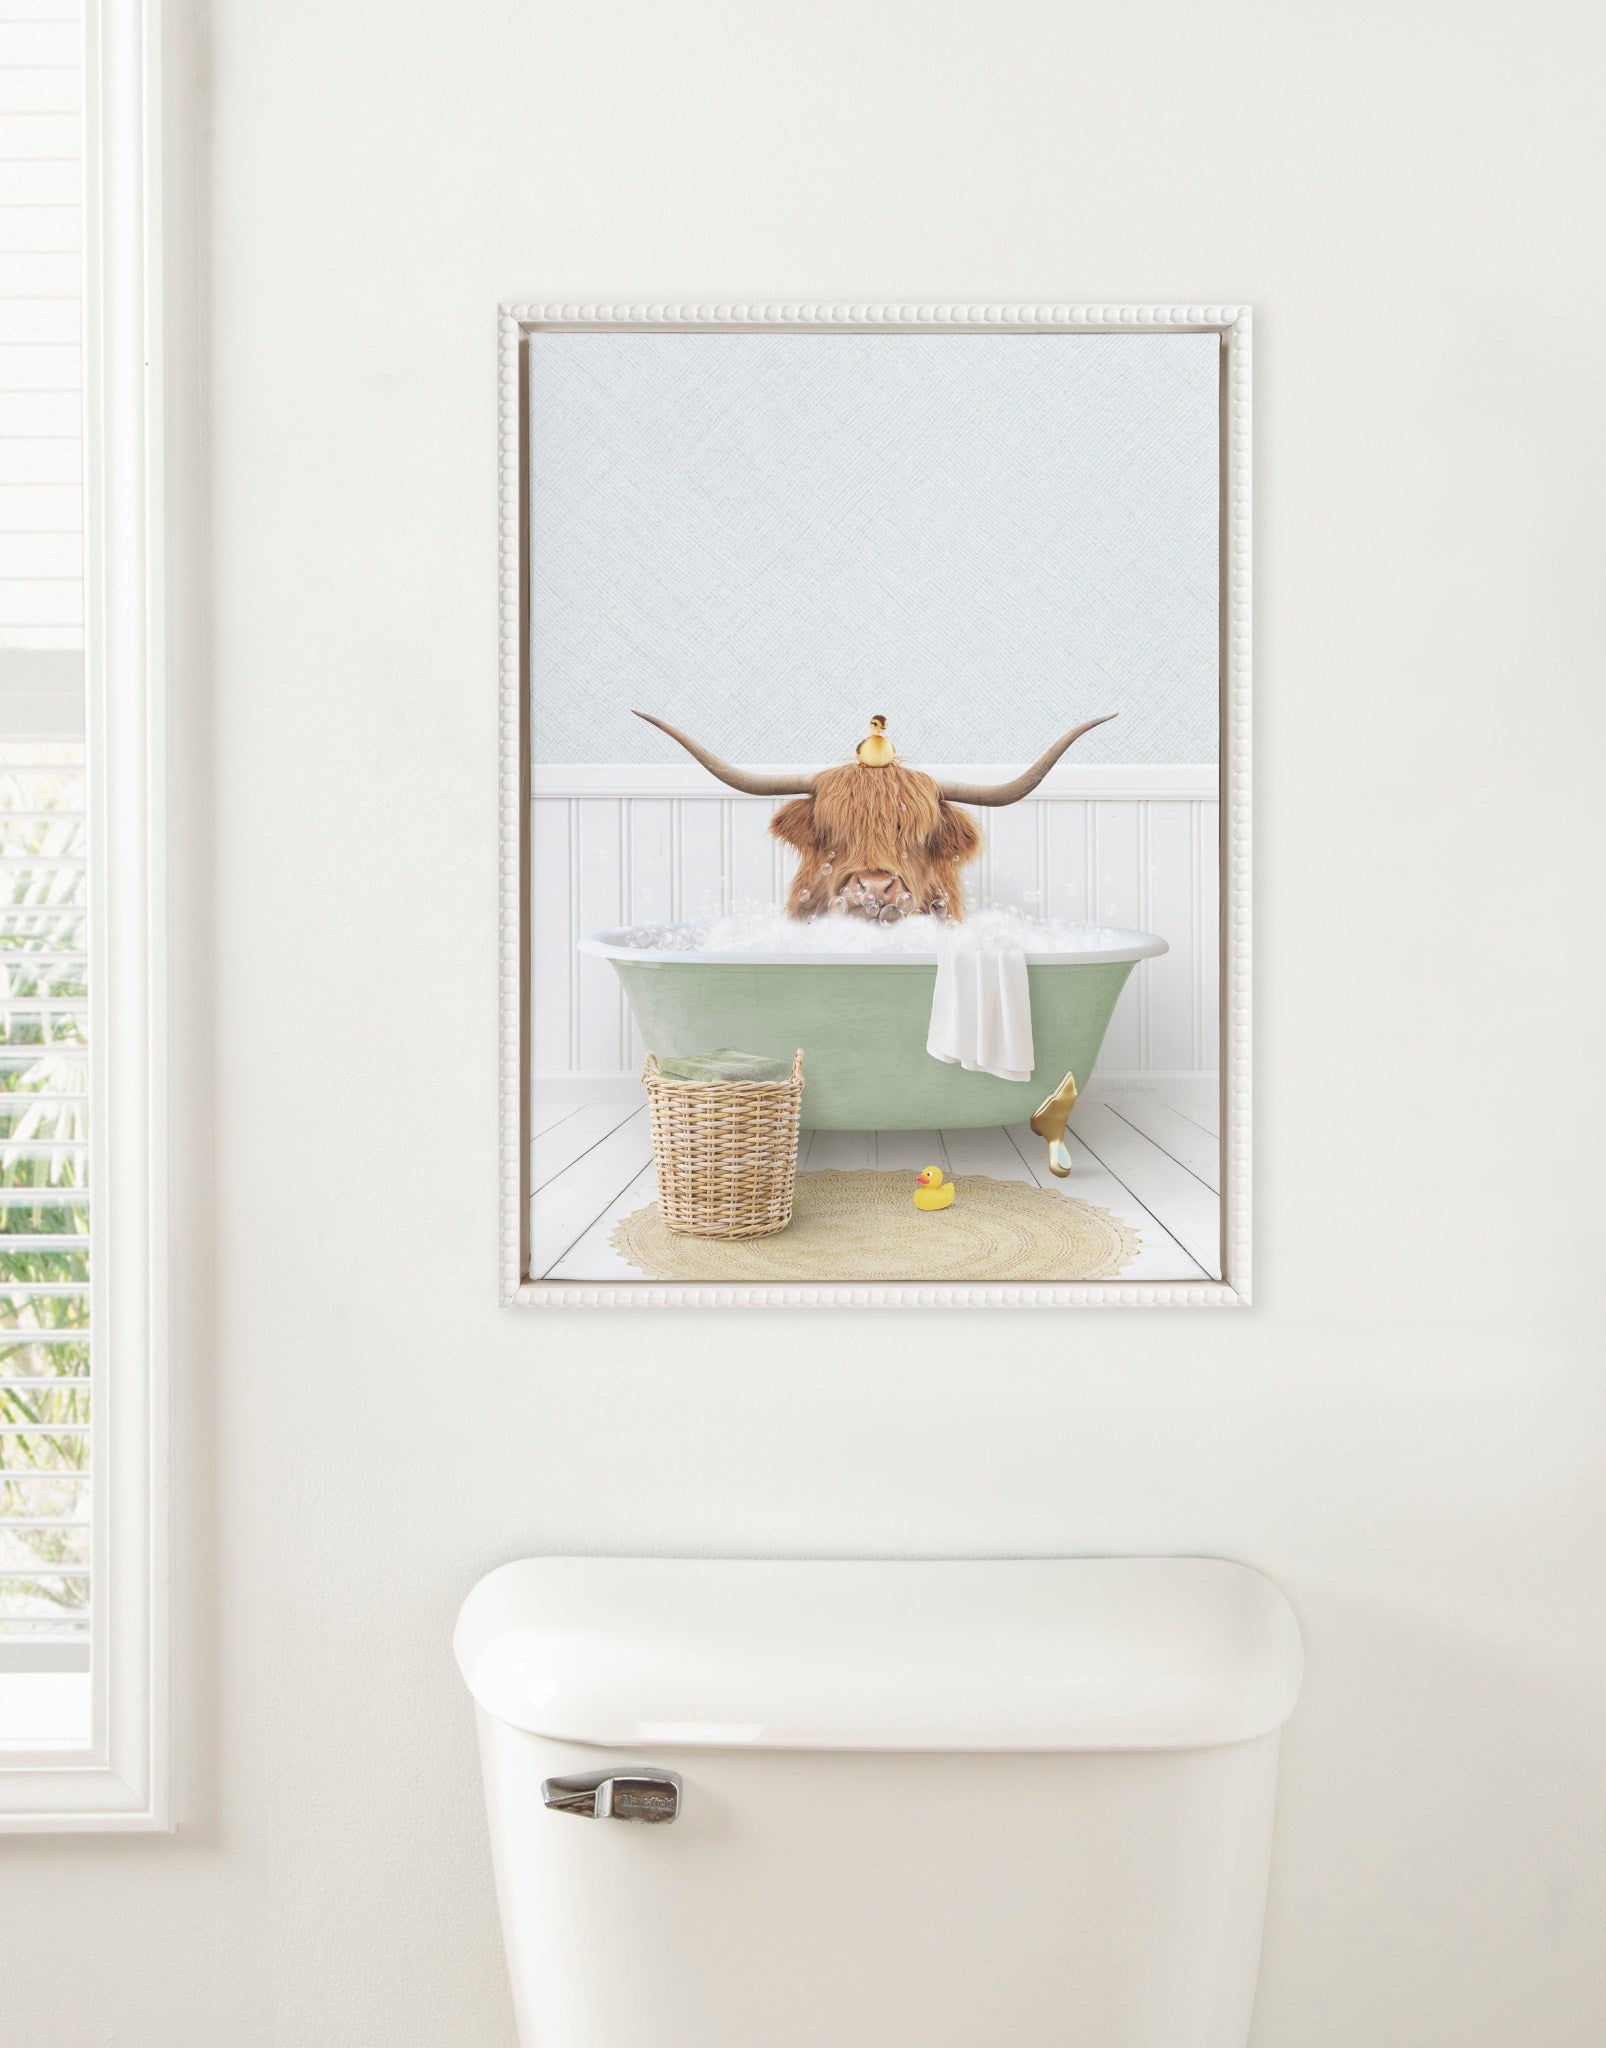 Sylvie Beaded Randall in Cottage Bath Framed Canvas by Amy Peterson